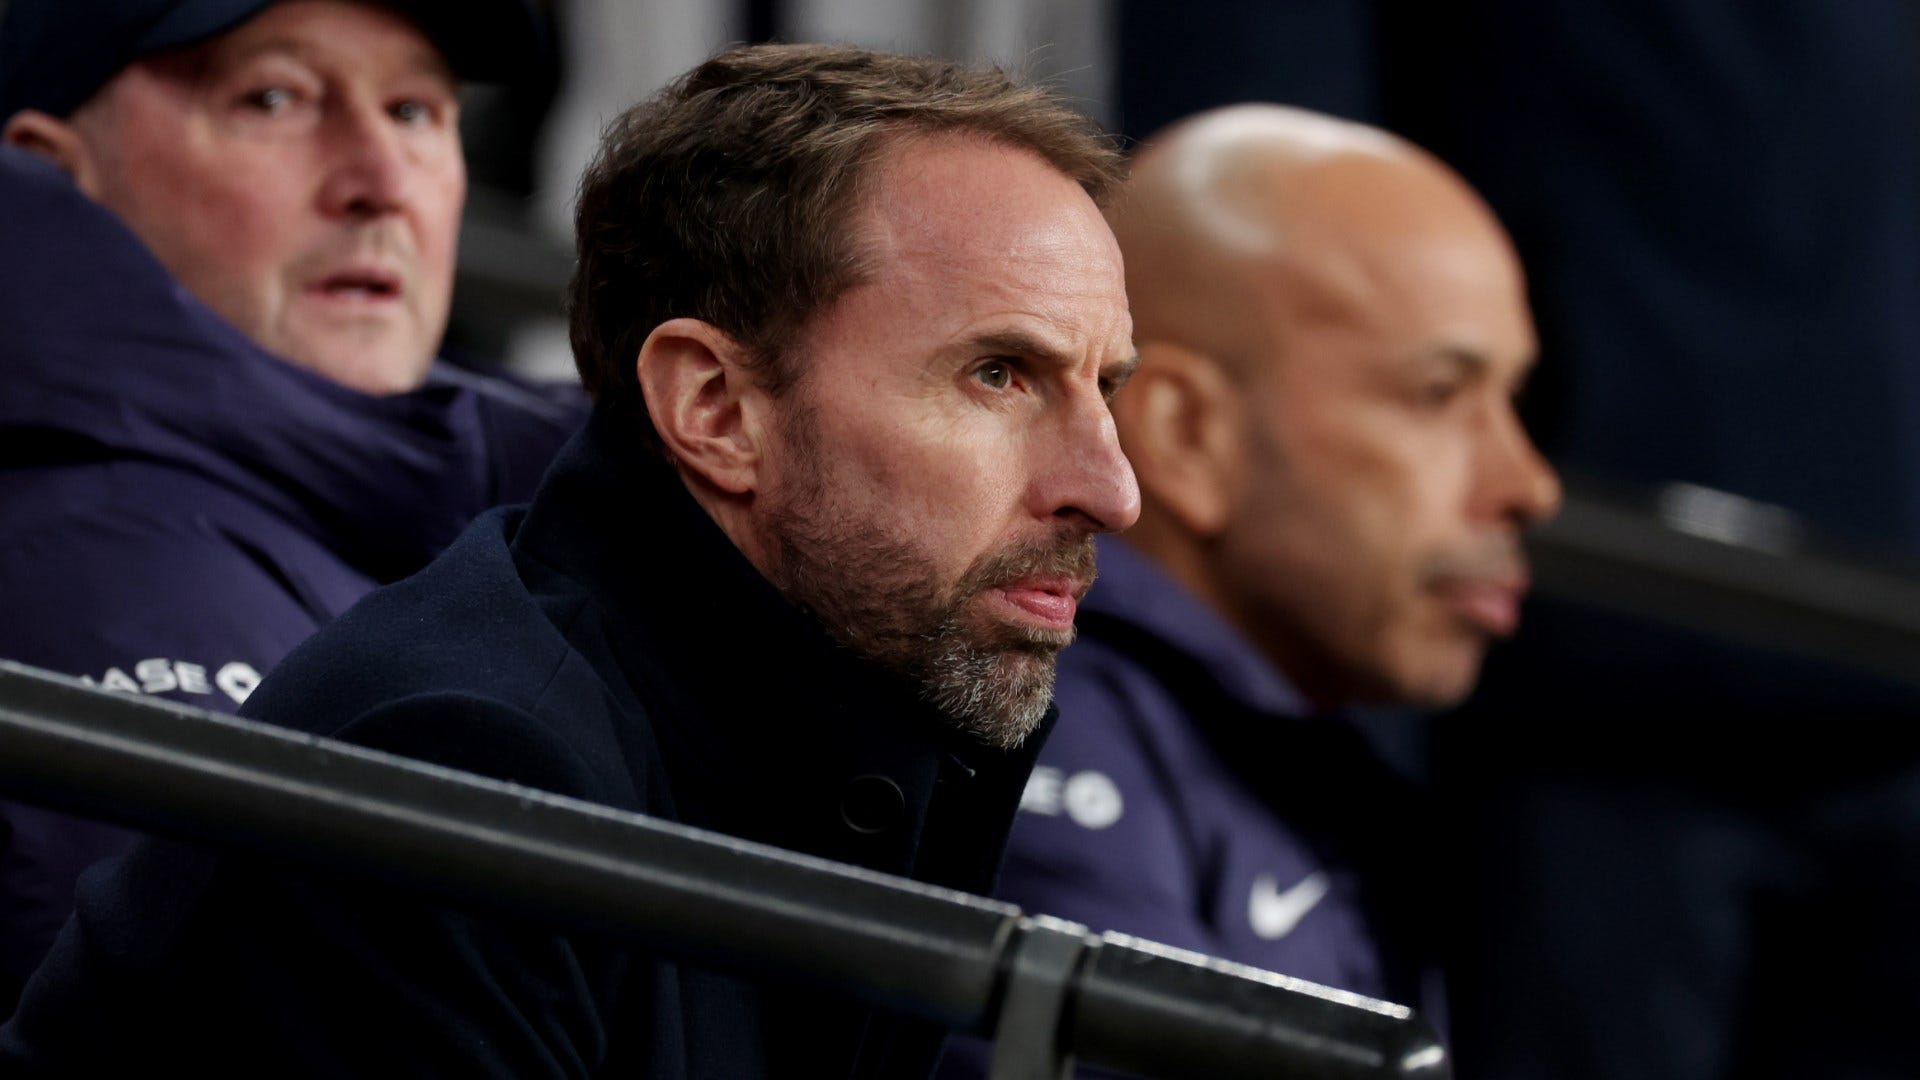 'Gareth Southgate doesn't want the Man Utd job!' - England manager backed to snub Red Devils in favour of sabbatical after Euro 2024